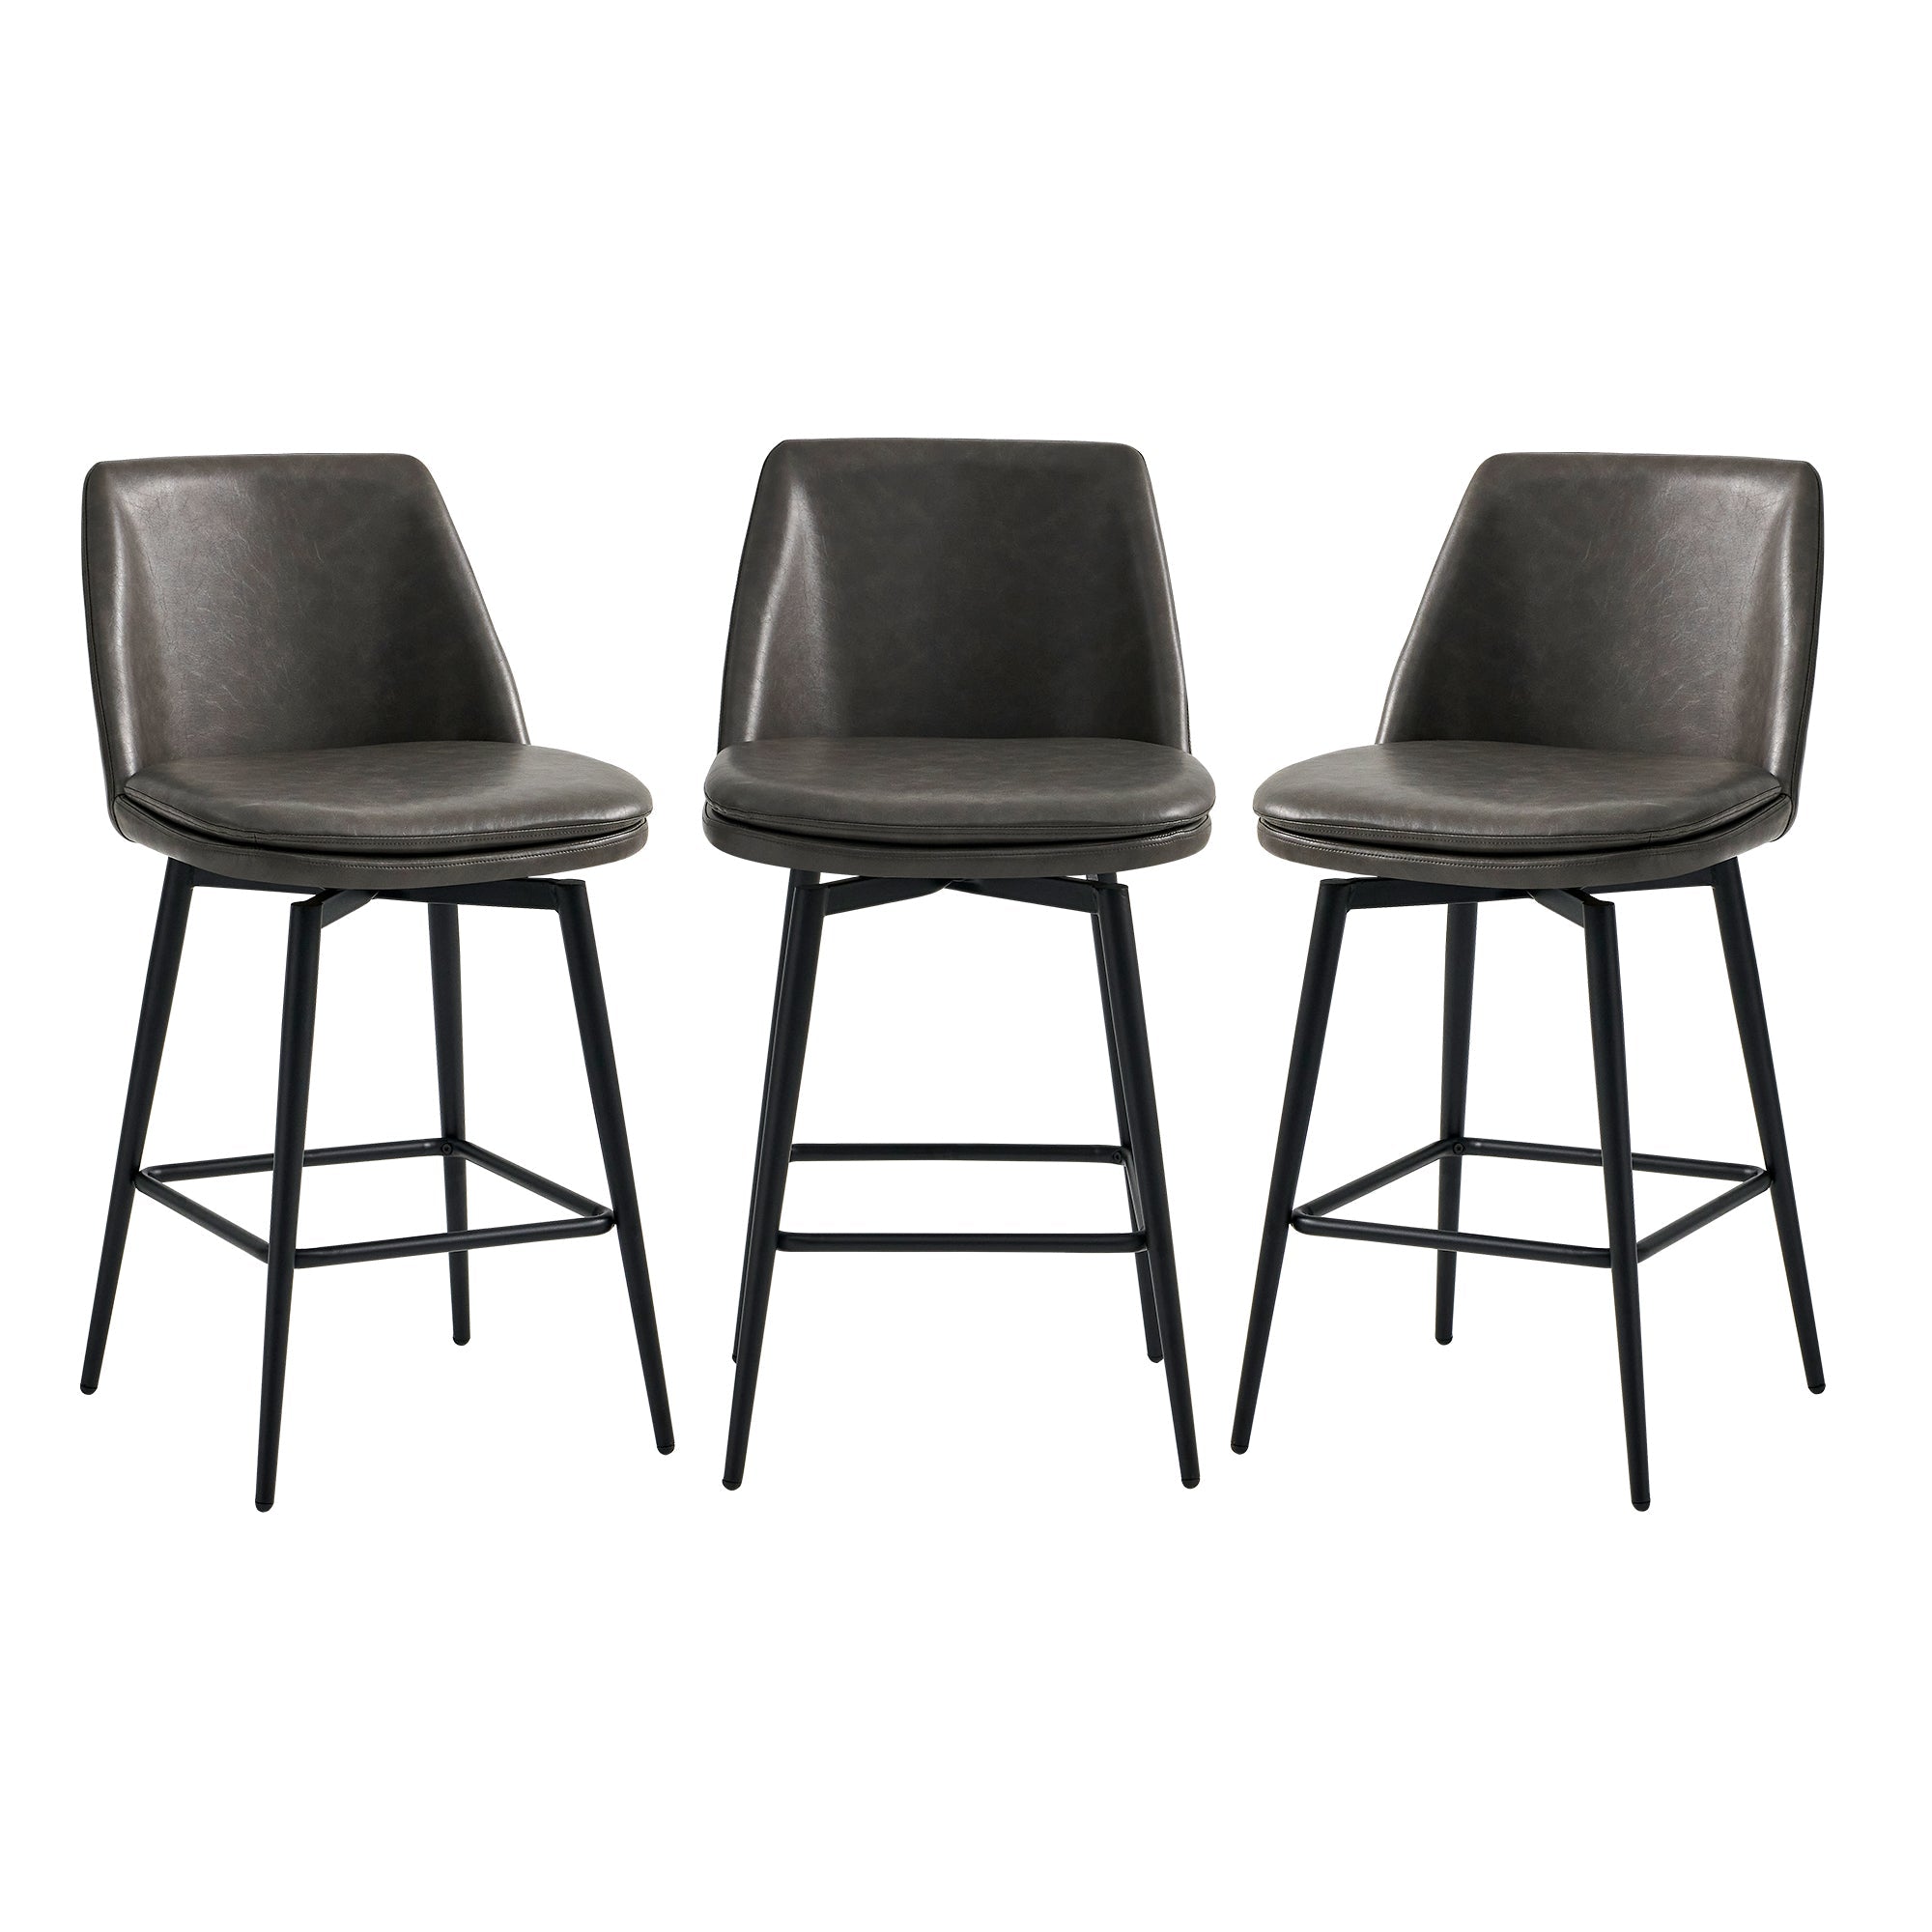 CHITA LIVING-Eli Swivel Counter Stool-Counter Stools-Faux Leather-Gray-Set of 3